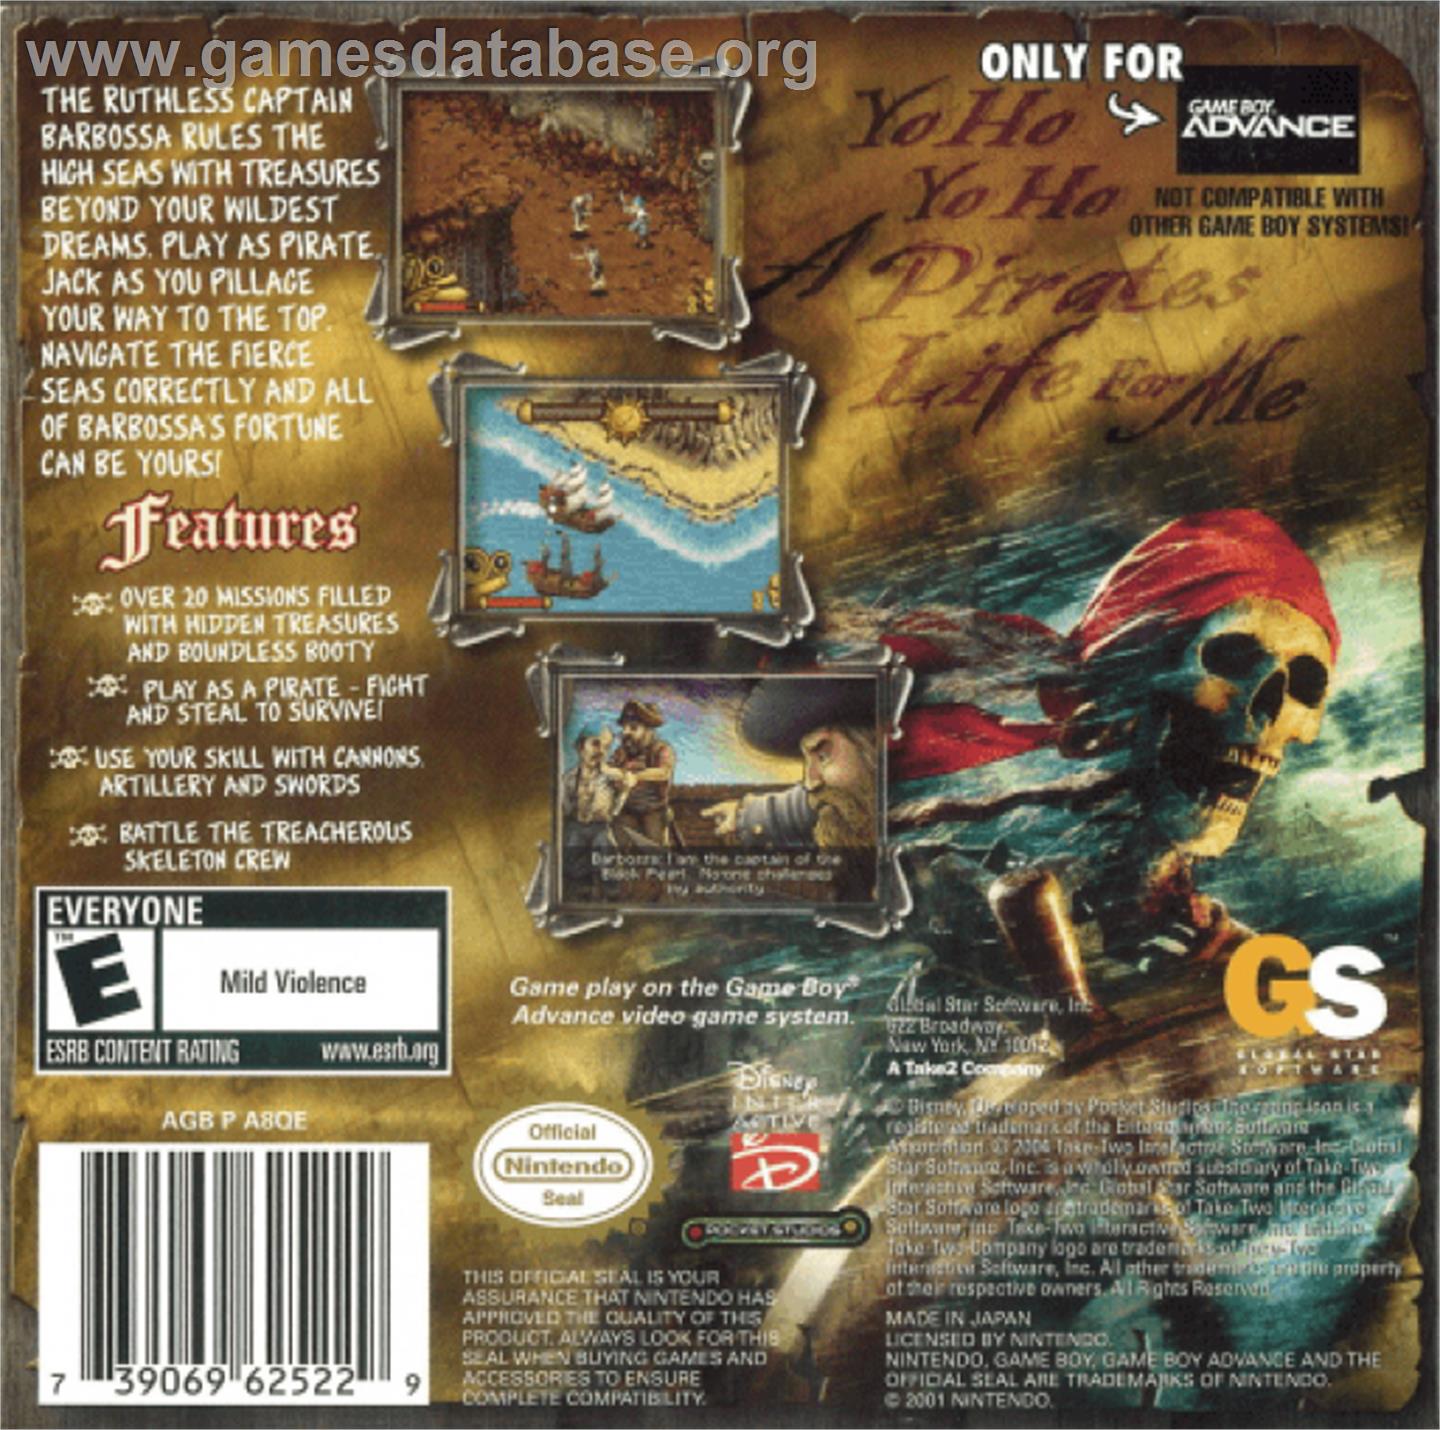 Pirates of the Caribbean: The Curse of the Black Pearl - Nintendo Game Boy Advance - Artwork - Box Back